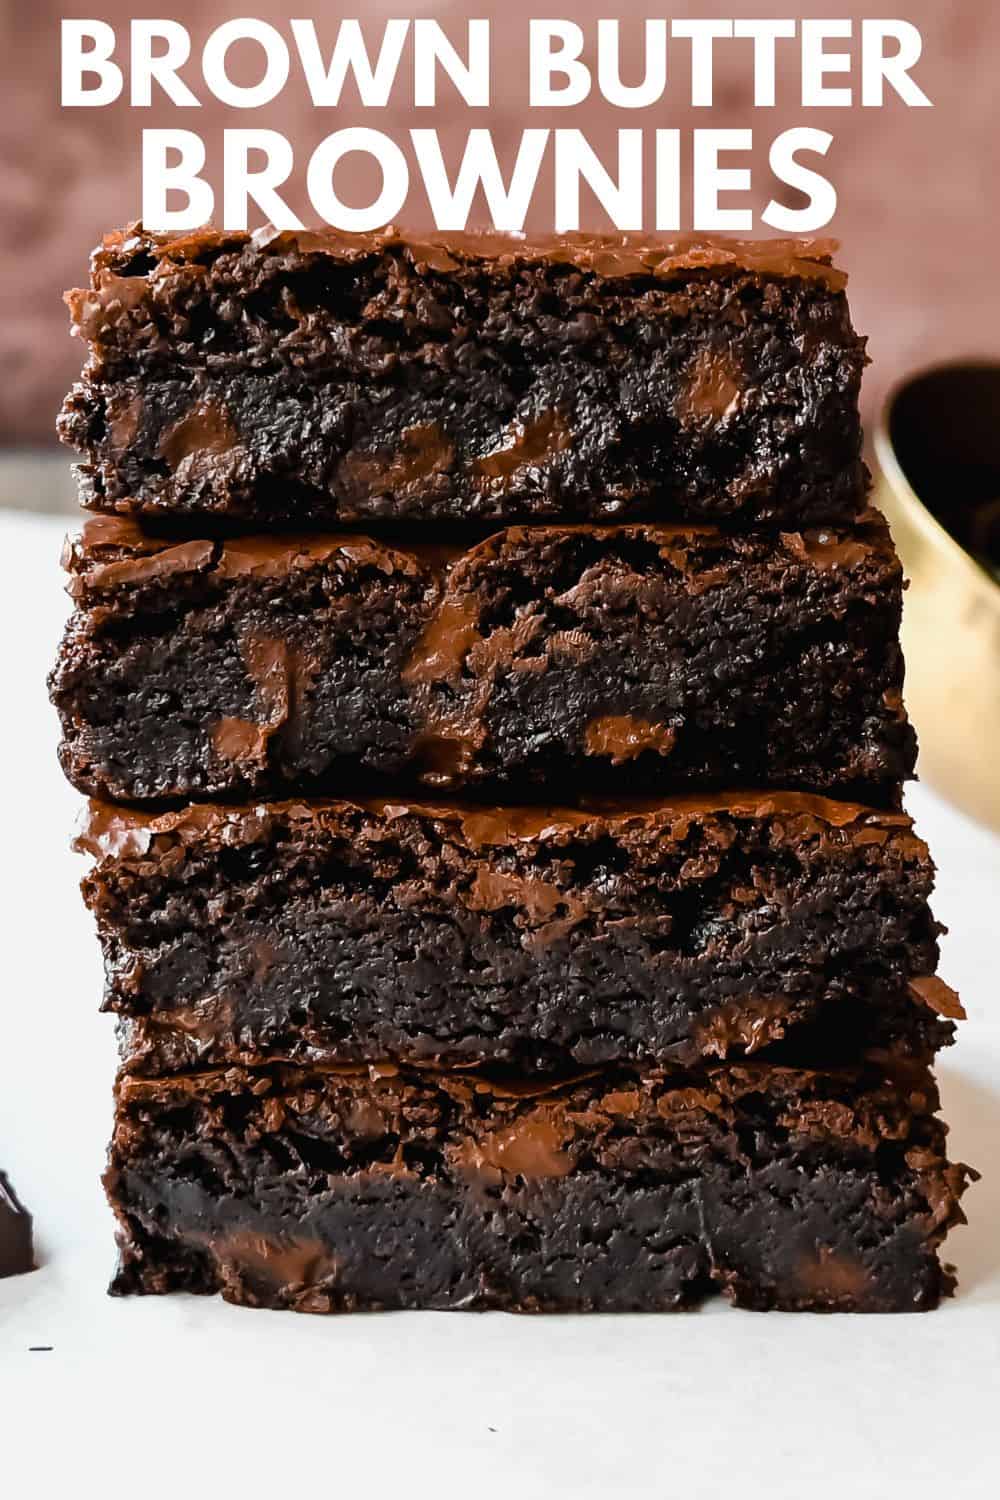 The most fudgy, chewy chocolate brownies made with brown butter to make them even better! Everyone always asks for this easy homemade brownie recipe.